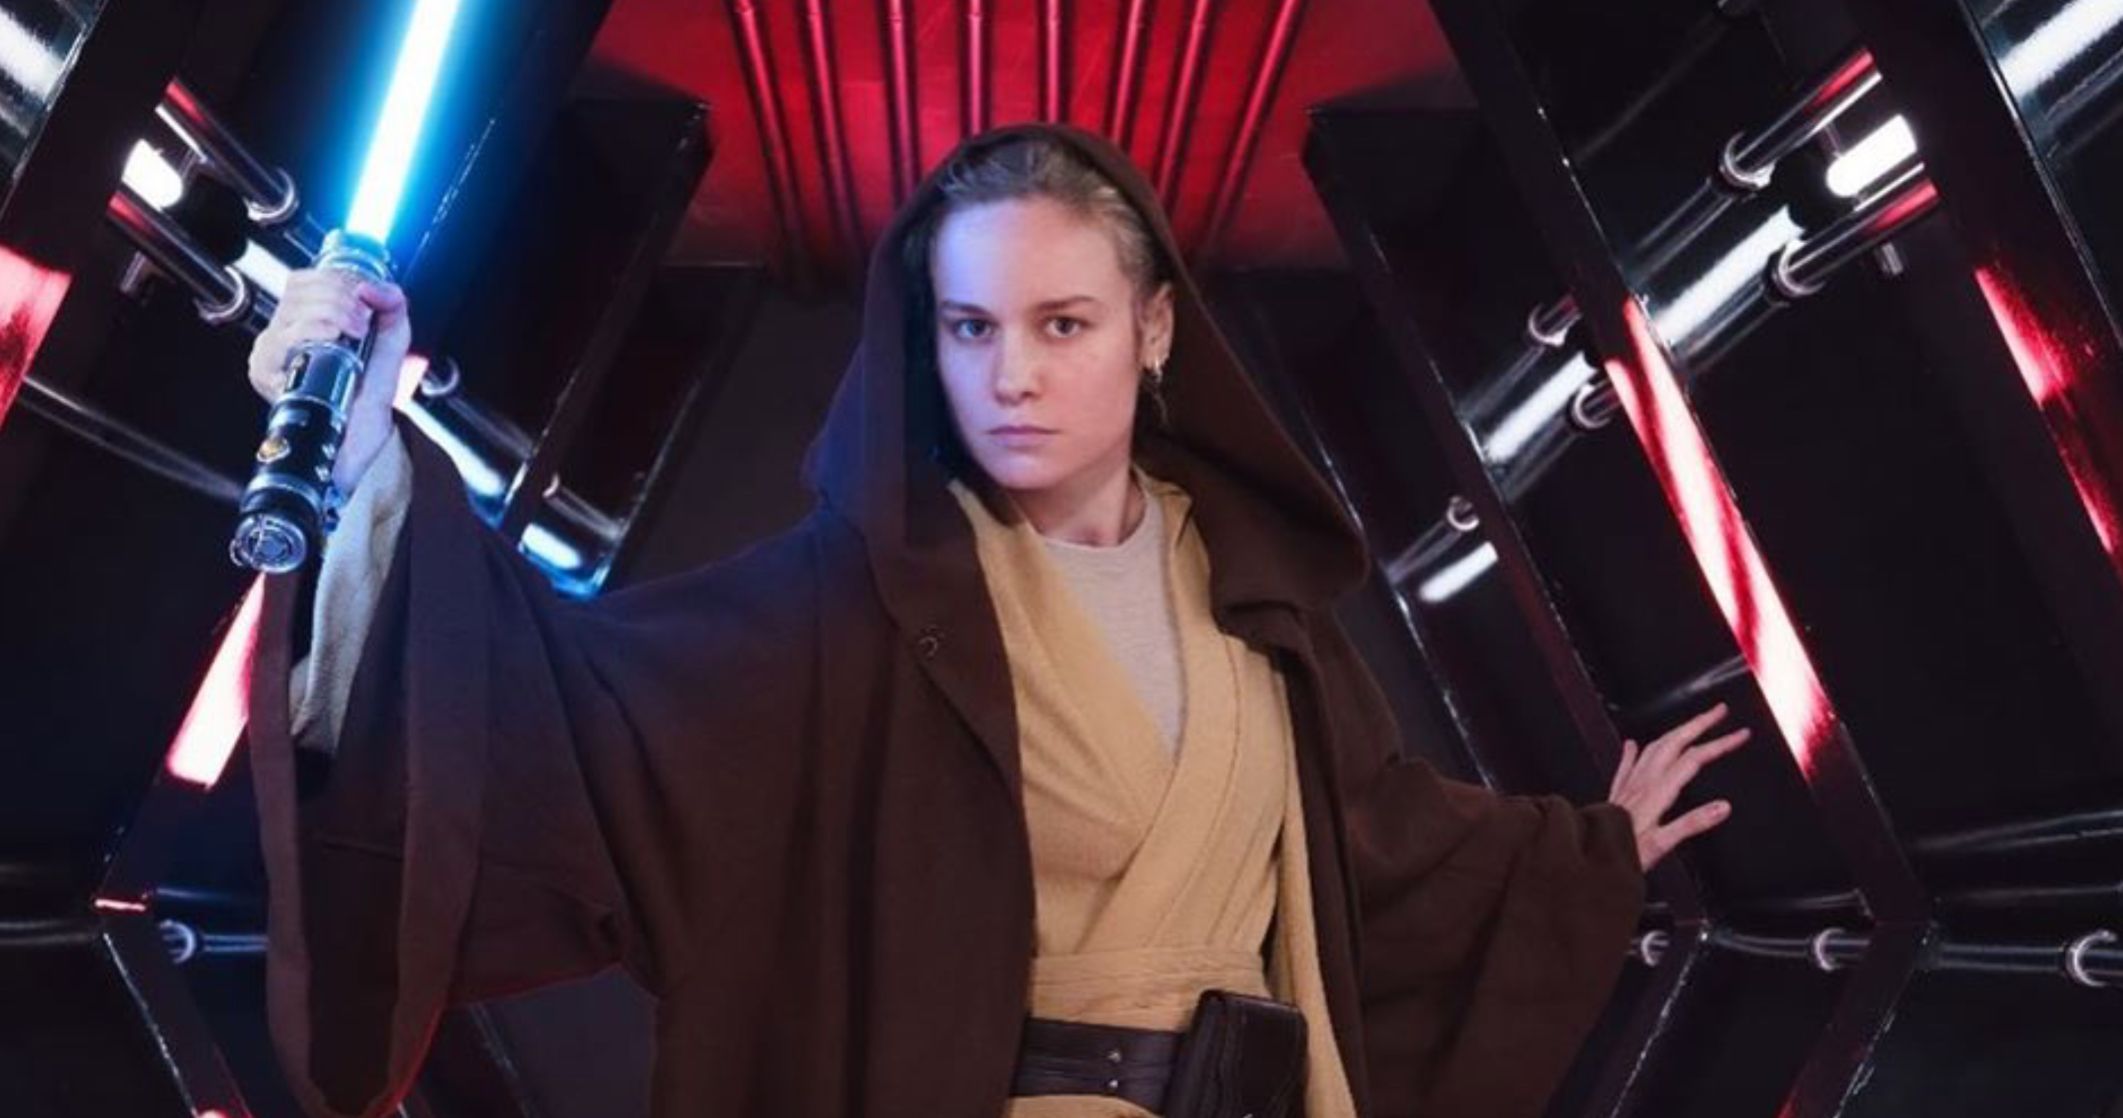 Is Kevin Feige Eyeing Brie Larson for His Star Wars Movie?